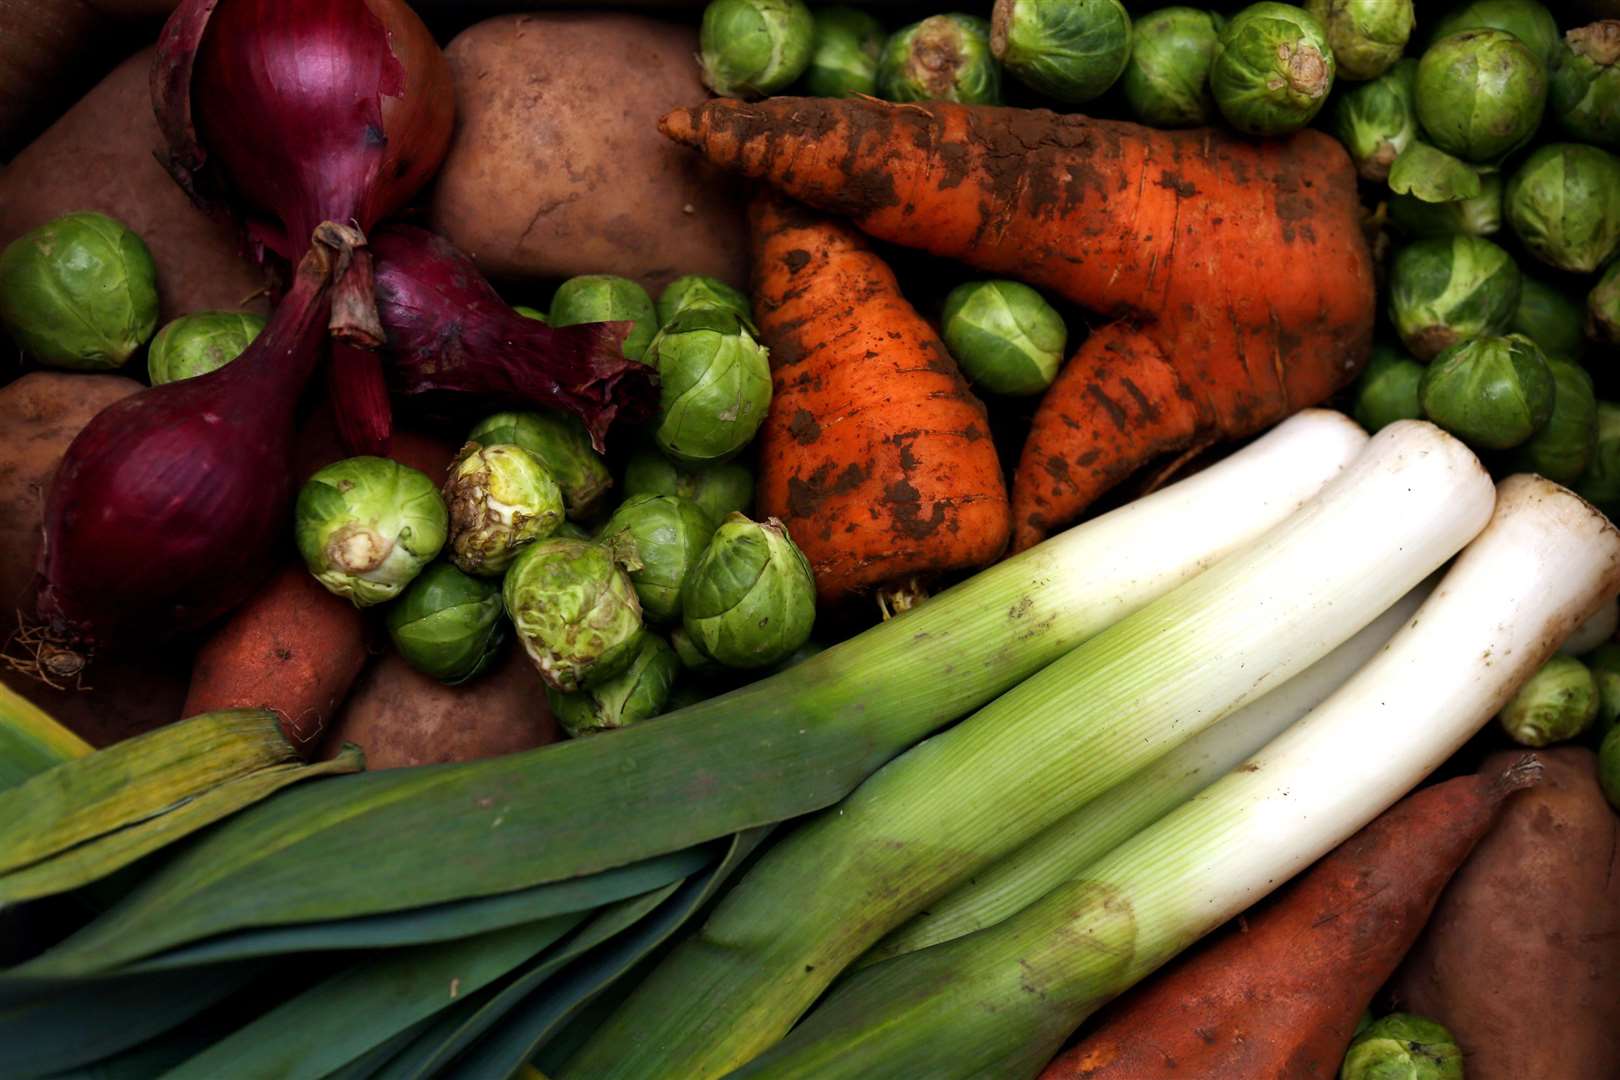 The future of vegetables-supply could be in trouble, the NFU has said (David Davies/PA)